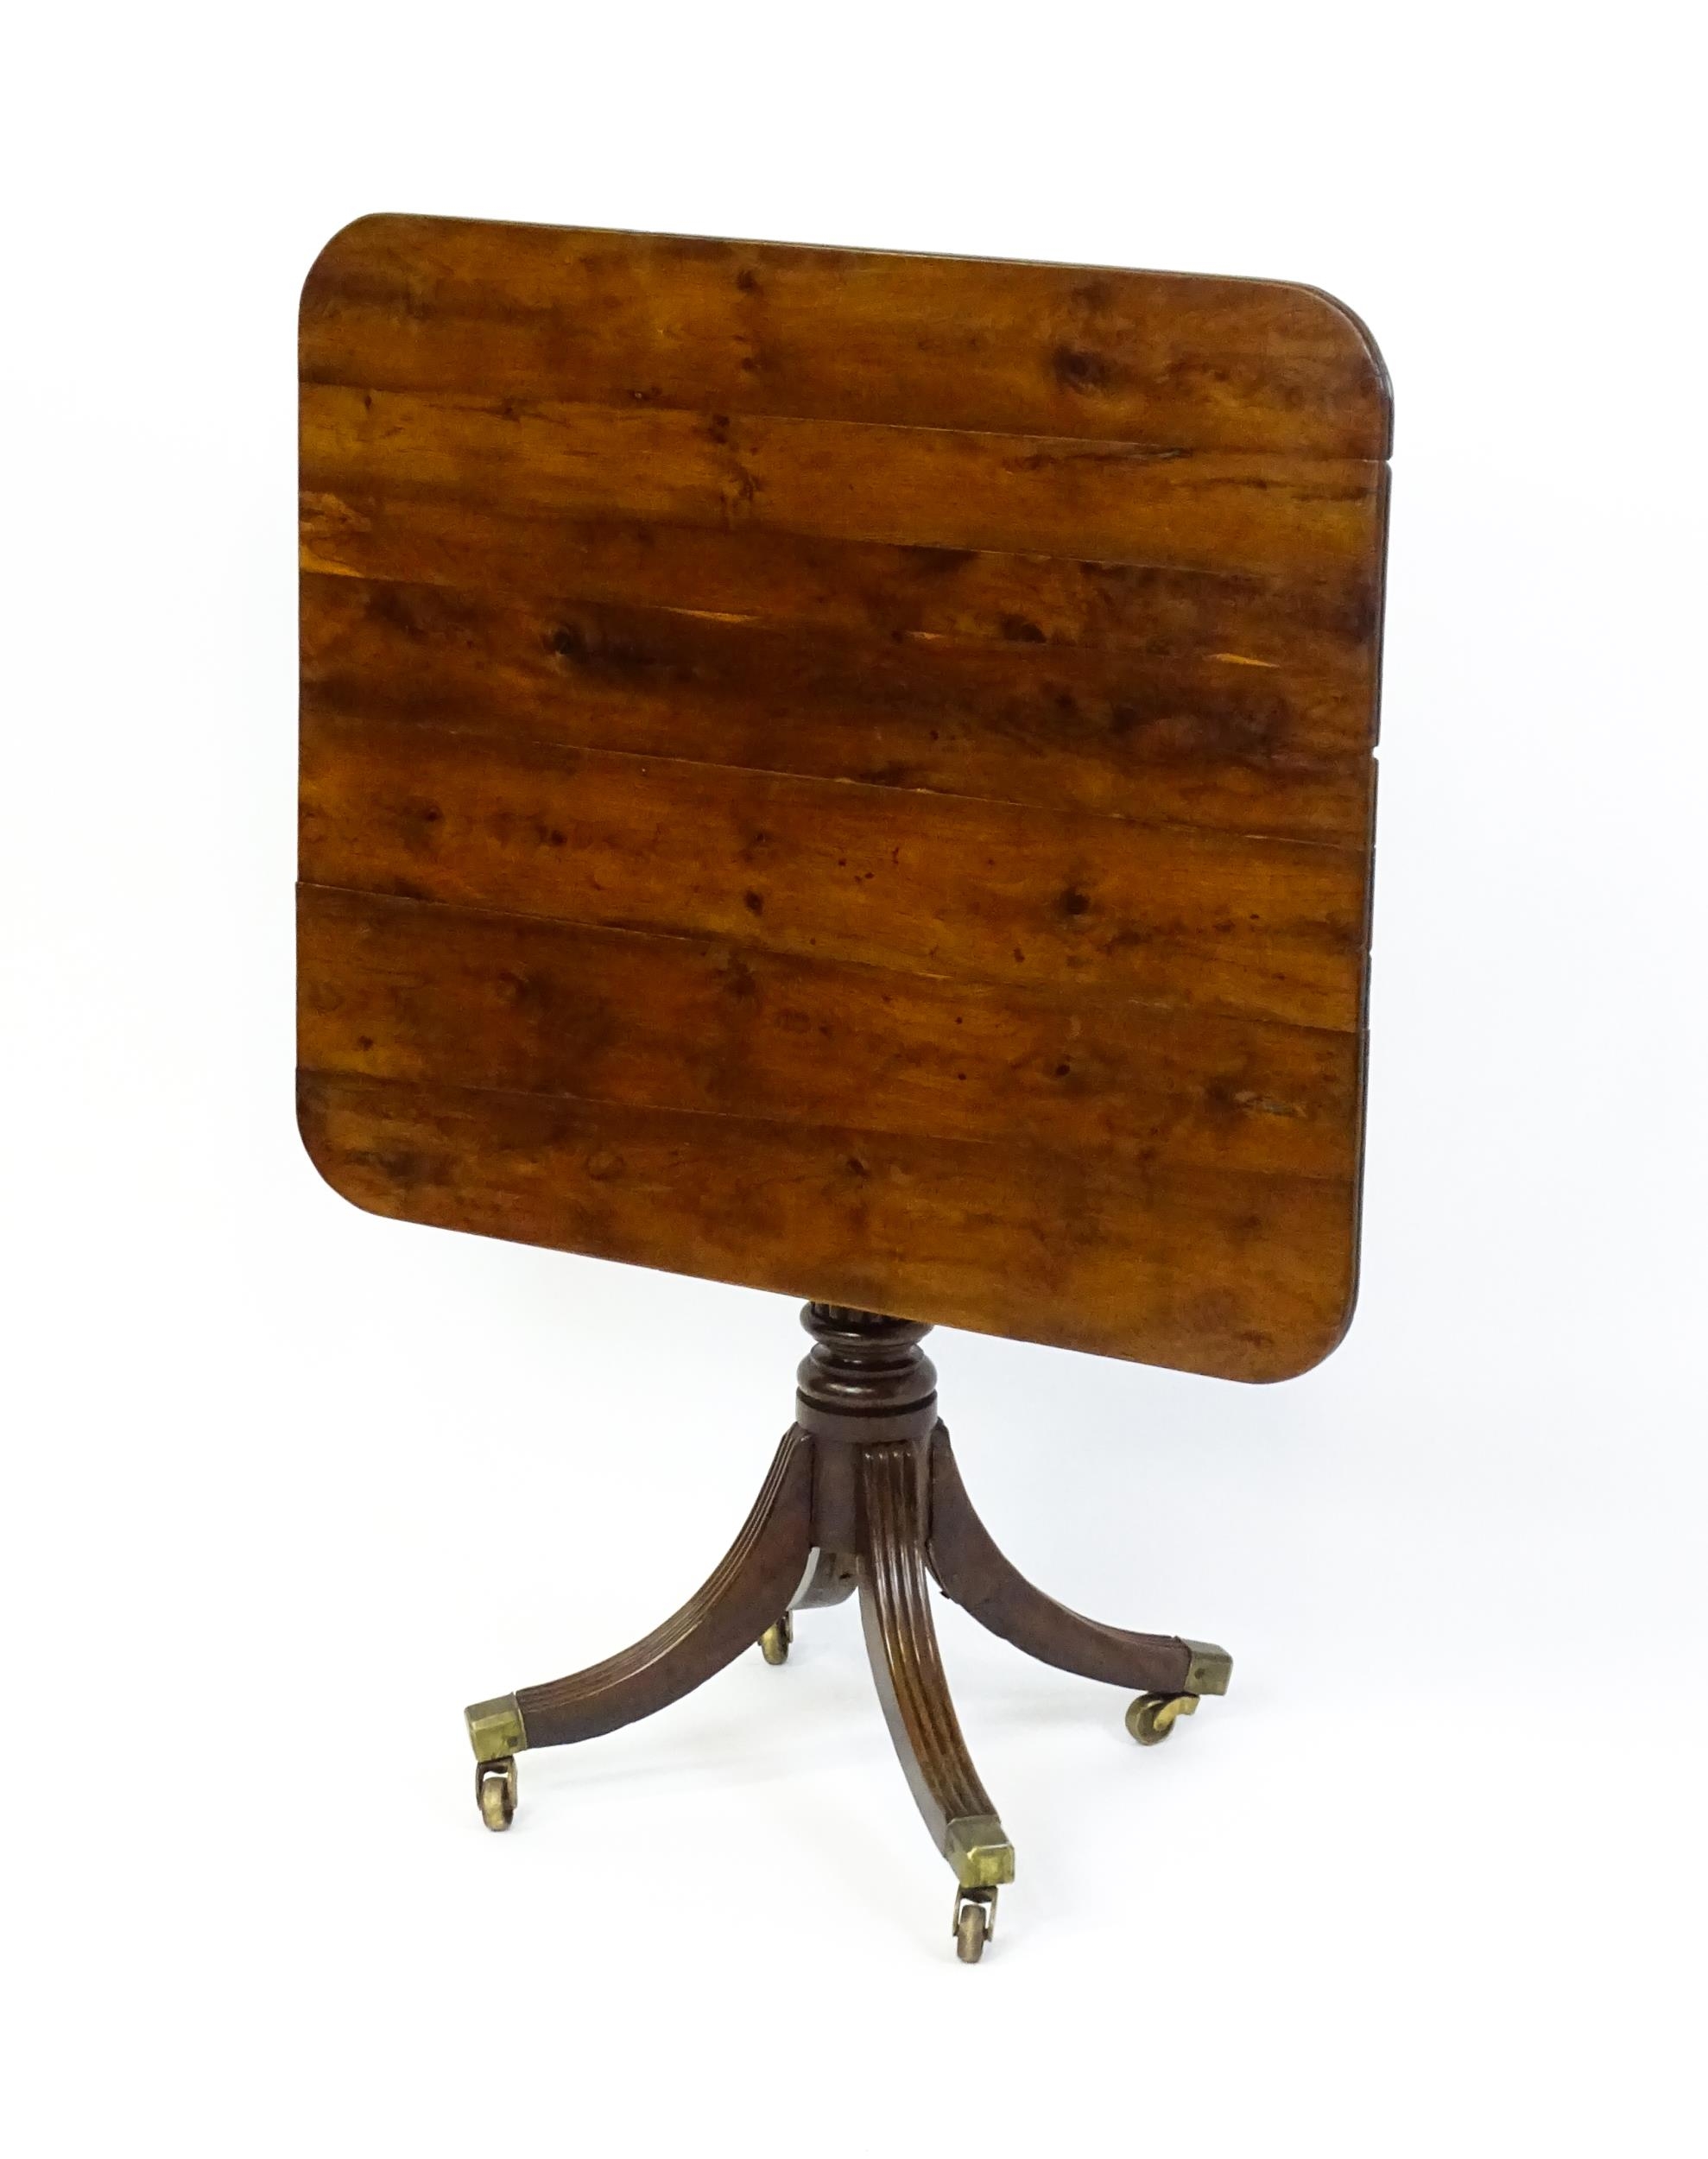 A 19thC tilt top occasional table with yew wood planked top above a reeded mahogany pedestal and - Image 9 of 13